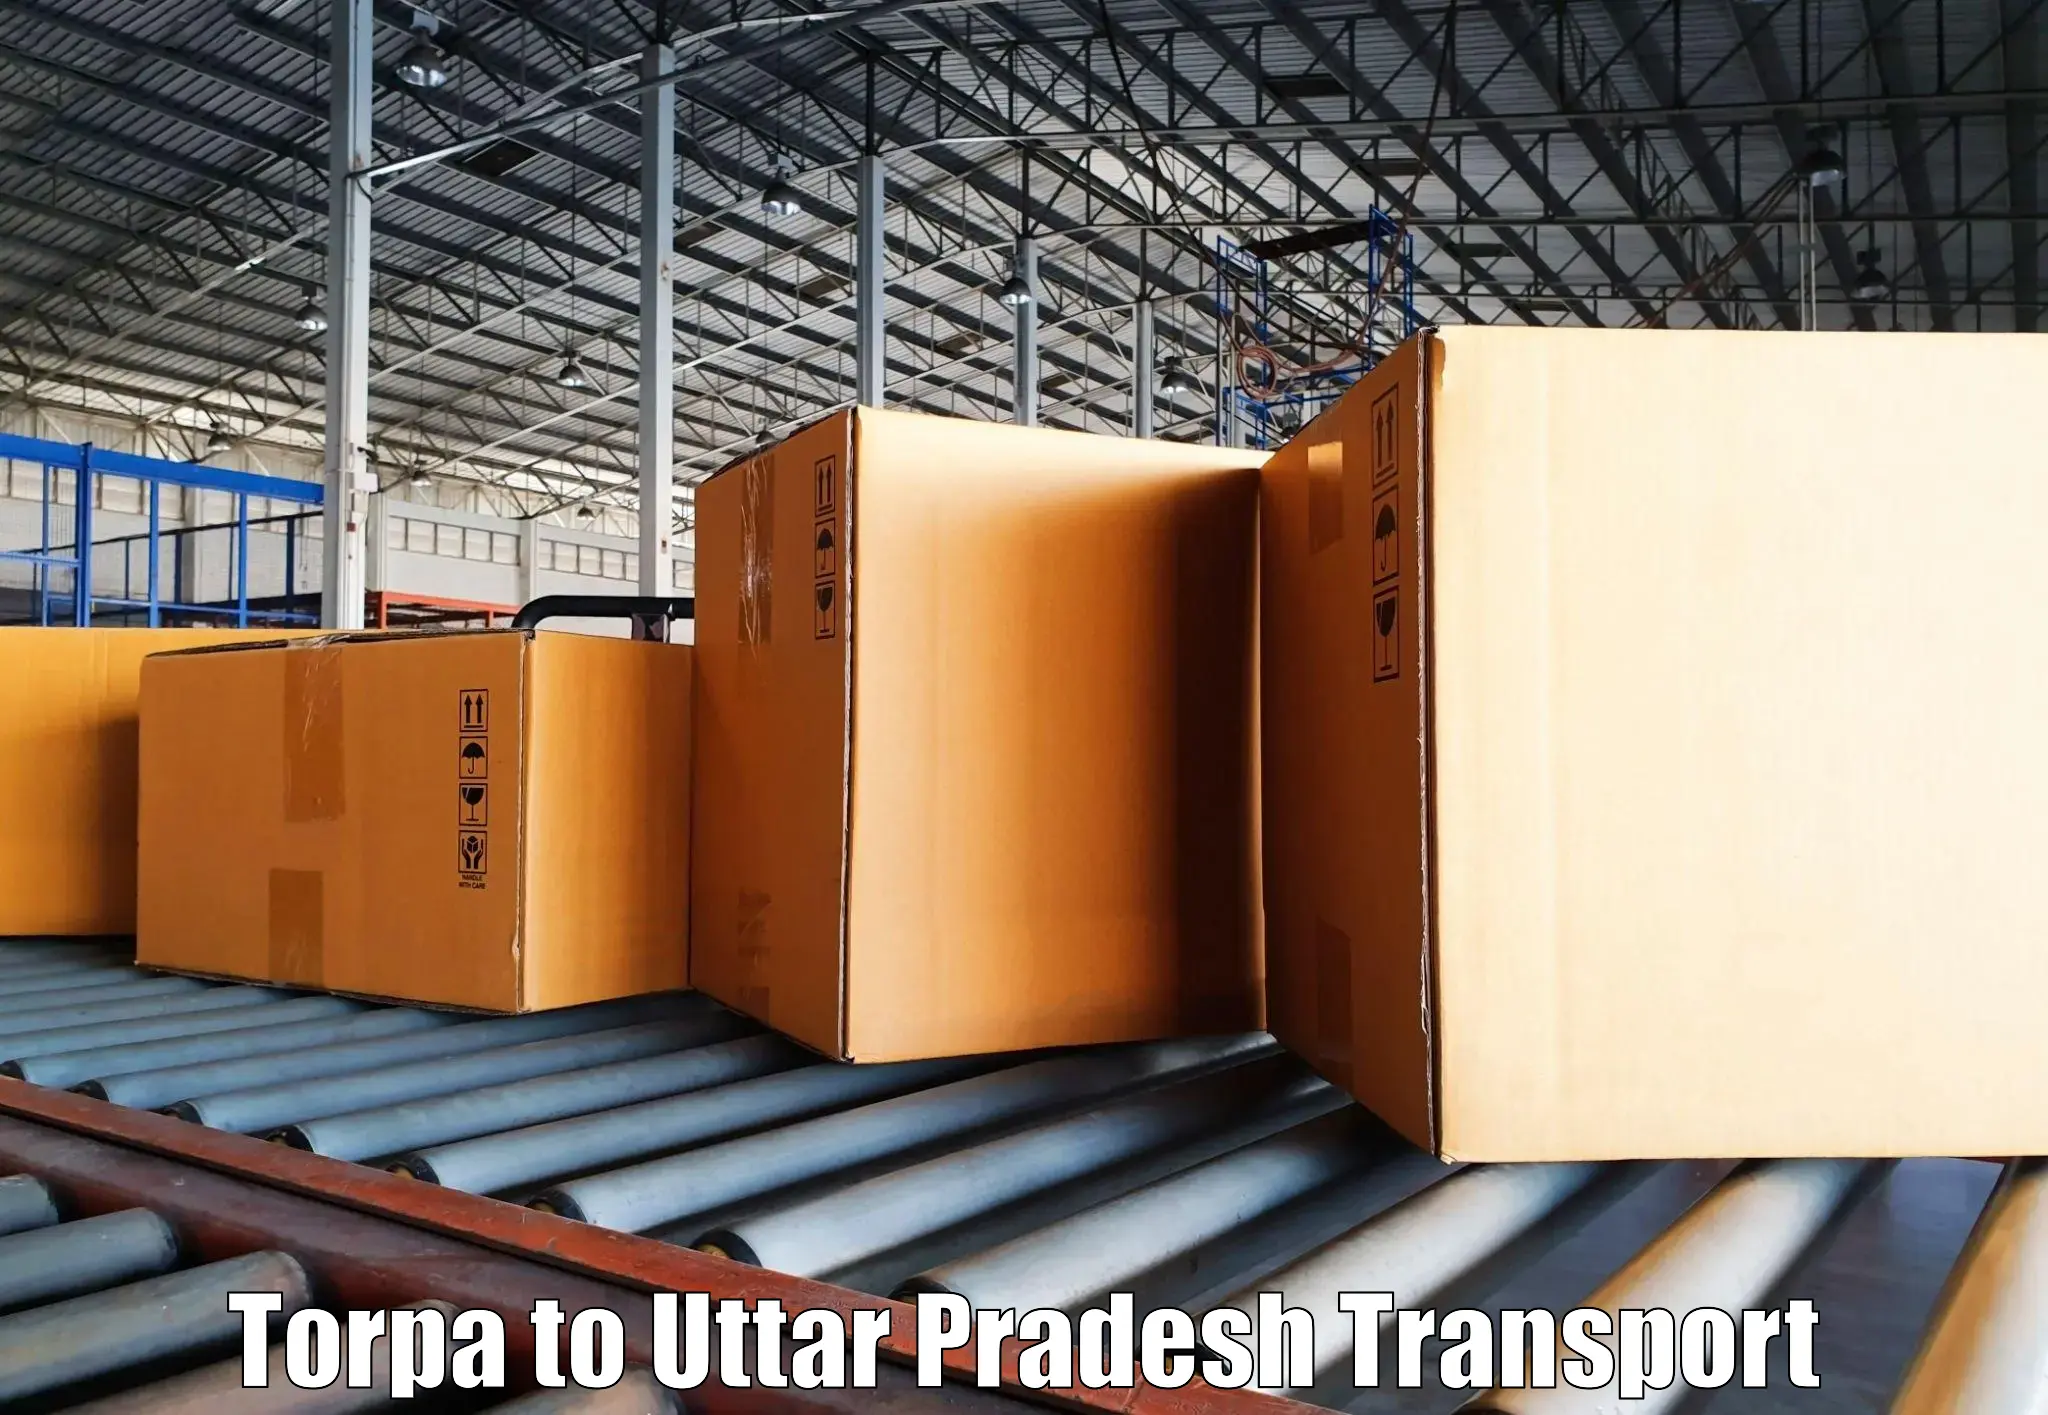 Transport bike from one state to another Torpa to Uttar Pradesh